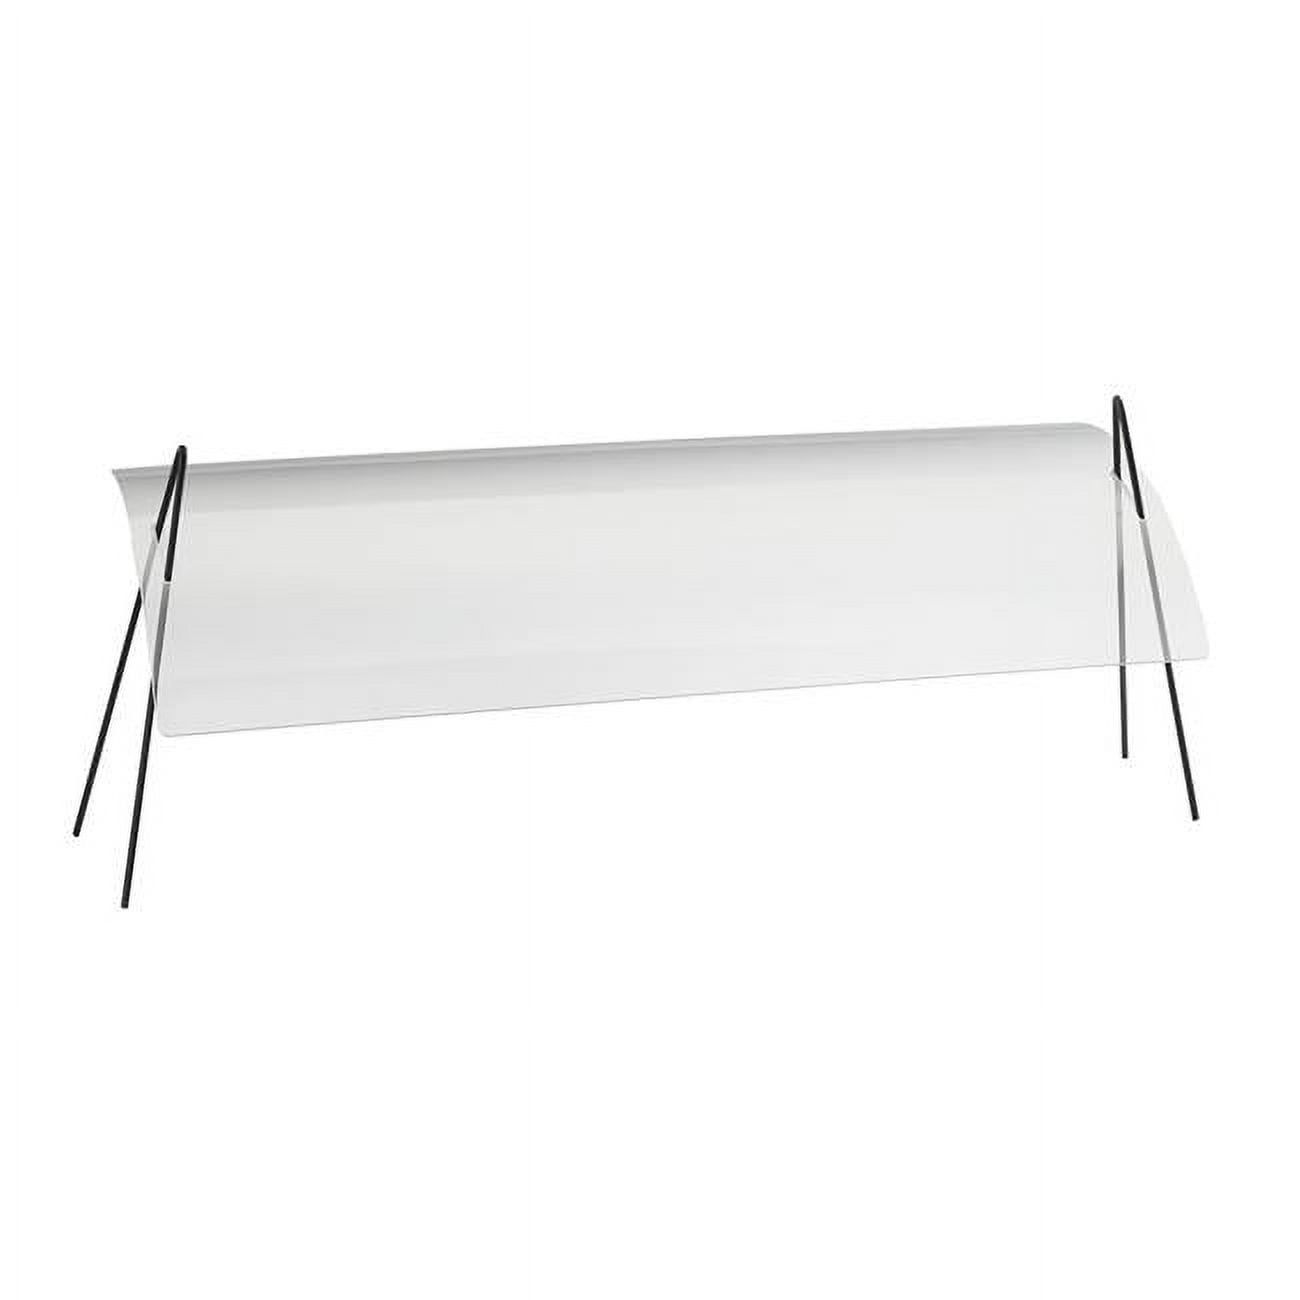 Picture of Cal Mil 1458-48 Acrylic Rectangular Sneeze Guard with Black Iron Wire Frame - 48 x 17.25 x 19 in.